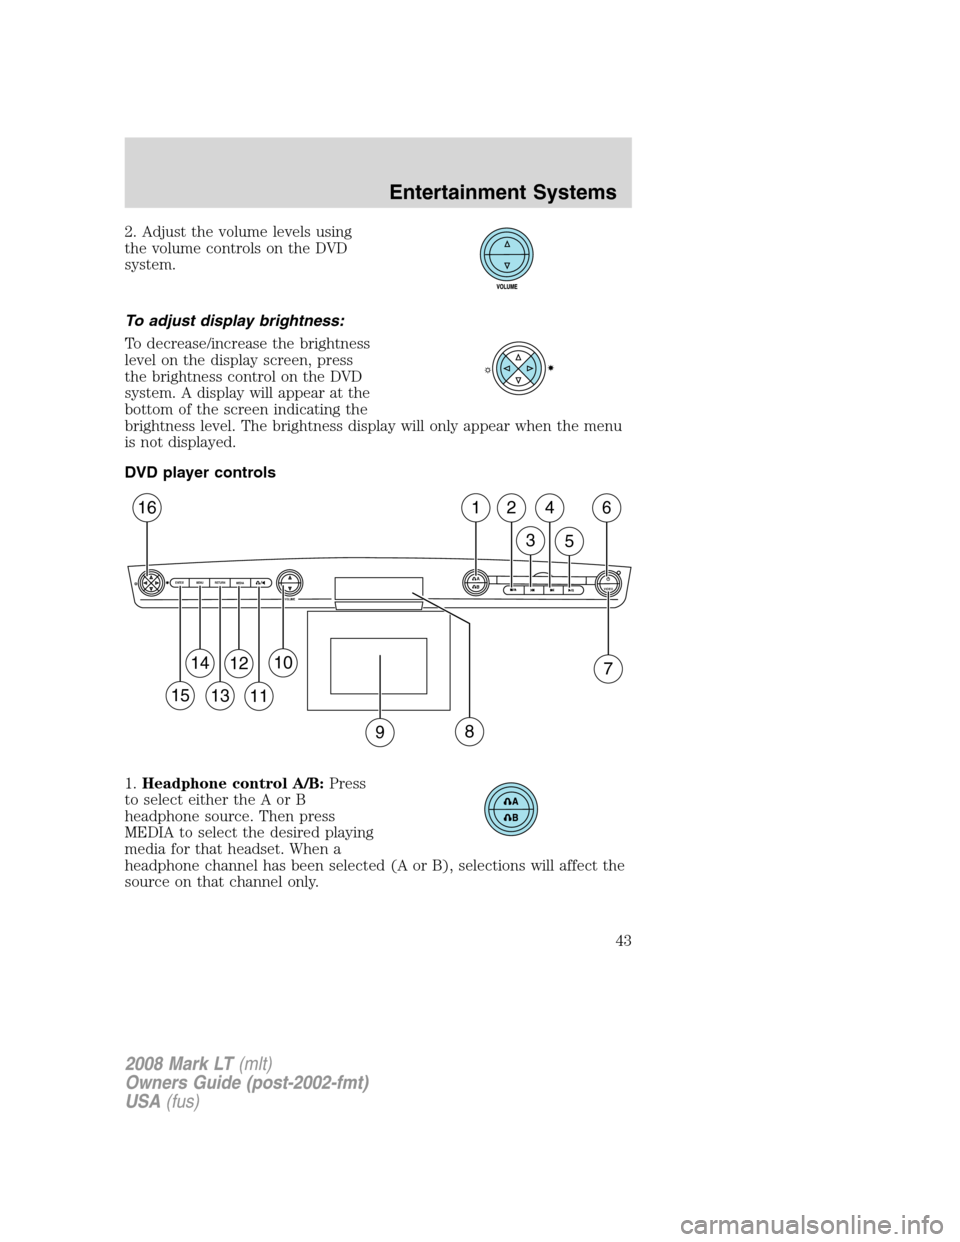 LINCOLN MARK LT 2008 Service Manual 2. Adjust the volume levels using
the volume controls on the DVD
system.
To adjust display brightness:
To decrease/increase the brightness
level on the display screen, press
the brightness control on 